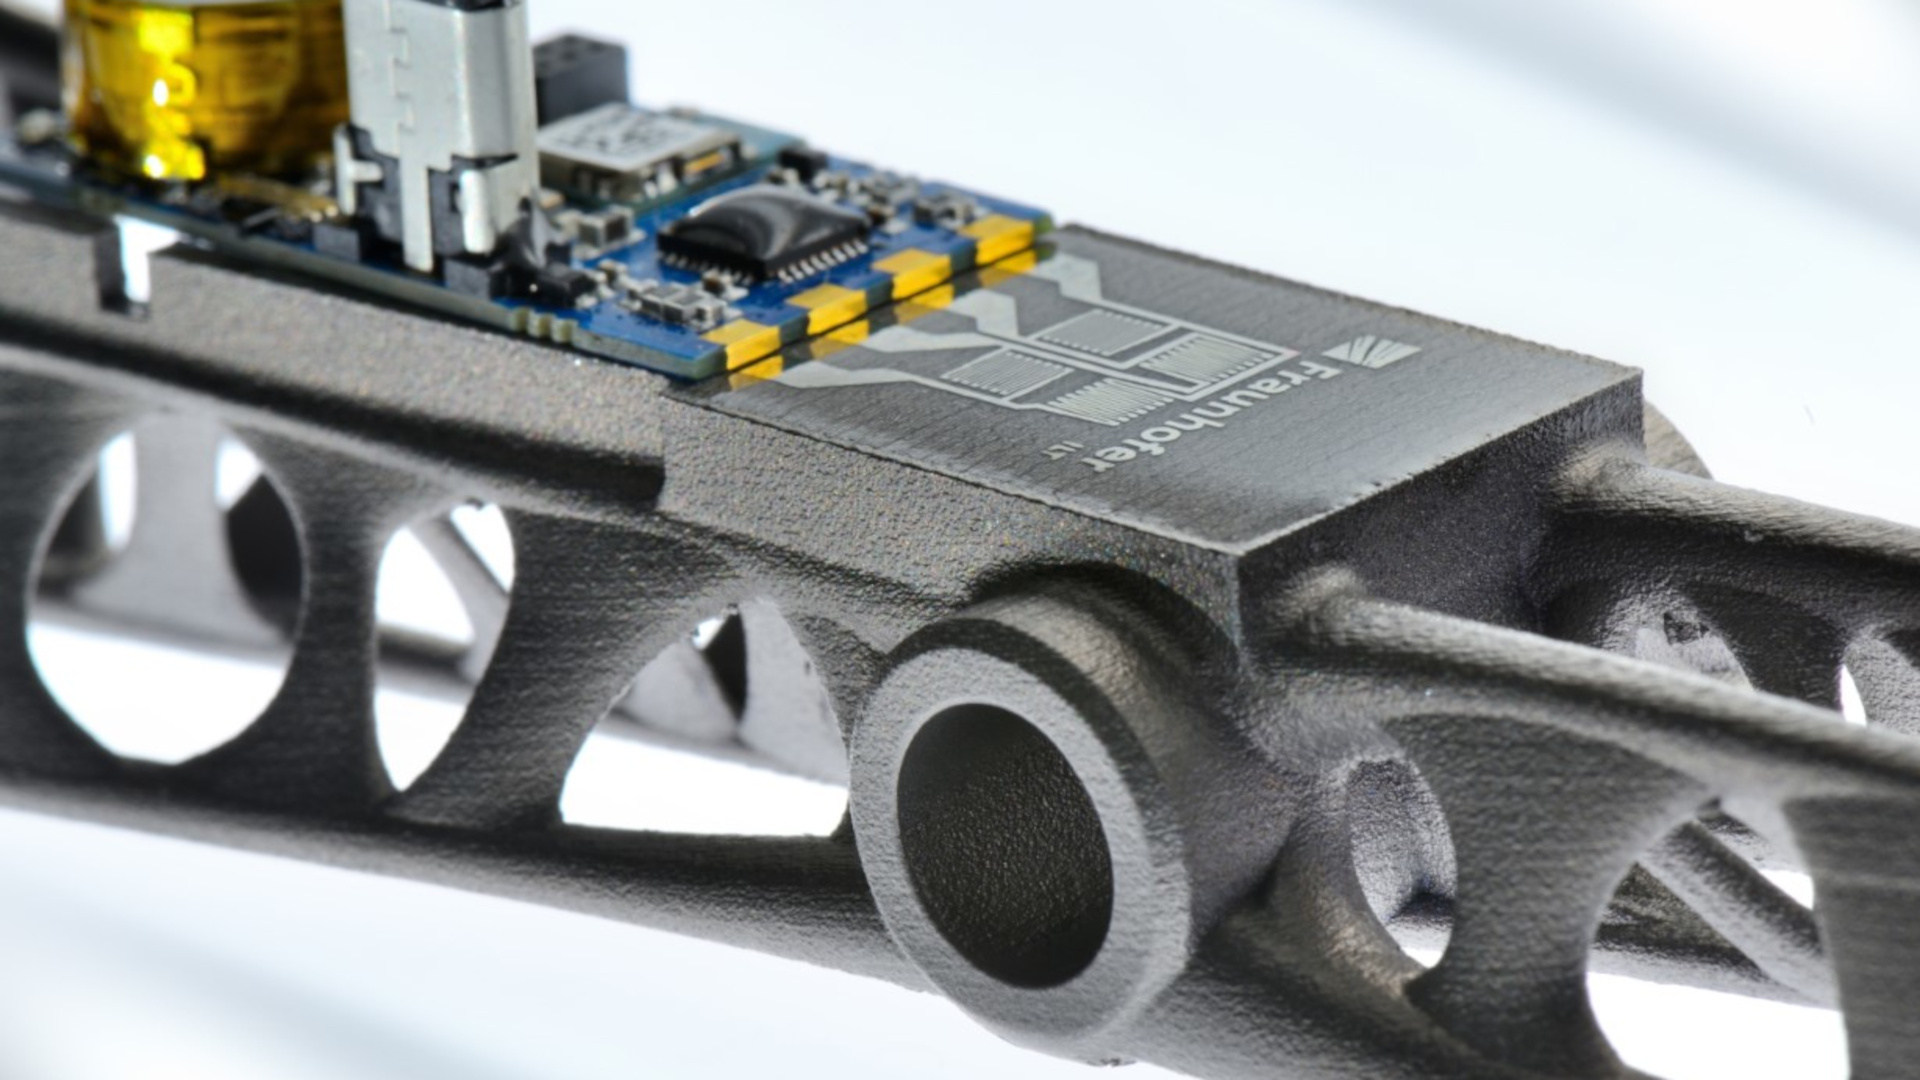 Practical demonstration: At Formnext 21, Fraunhofer ILT will be demonstrating the possibilities of sensor integration using an LPBFprinted demonstrator with a printed measuring grid including conductors.